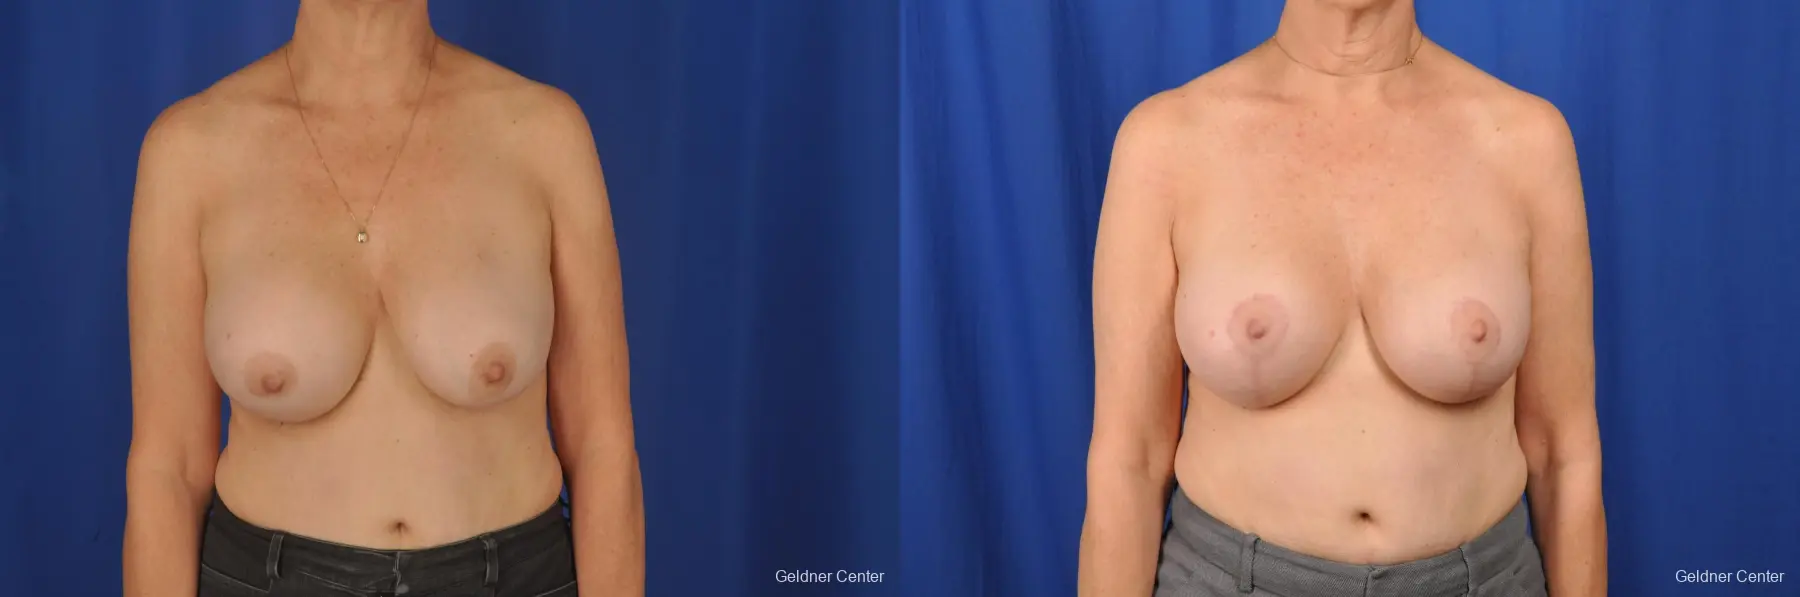 Breast Lift Hinsdale, Chicago 2058 - Before and After